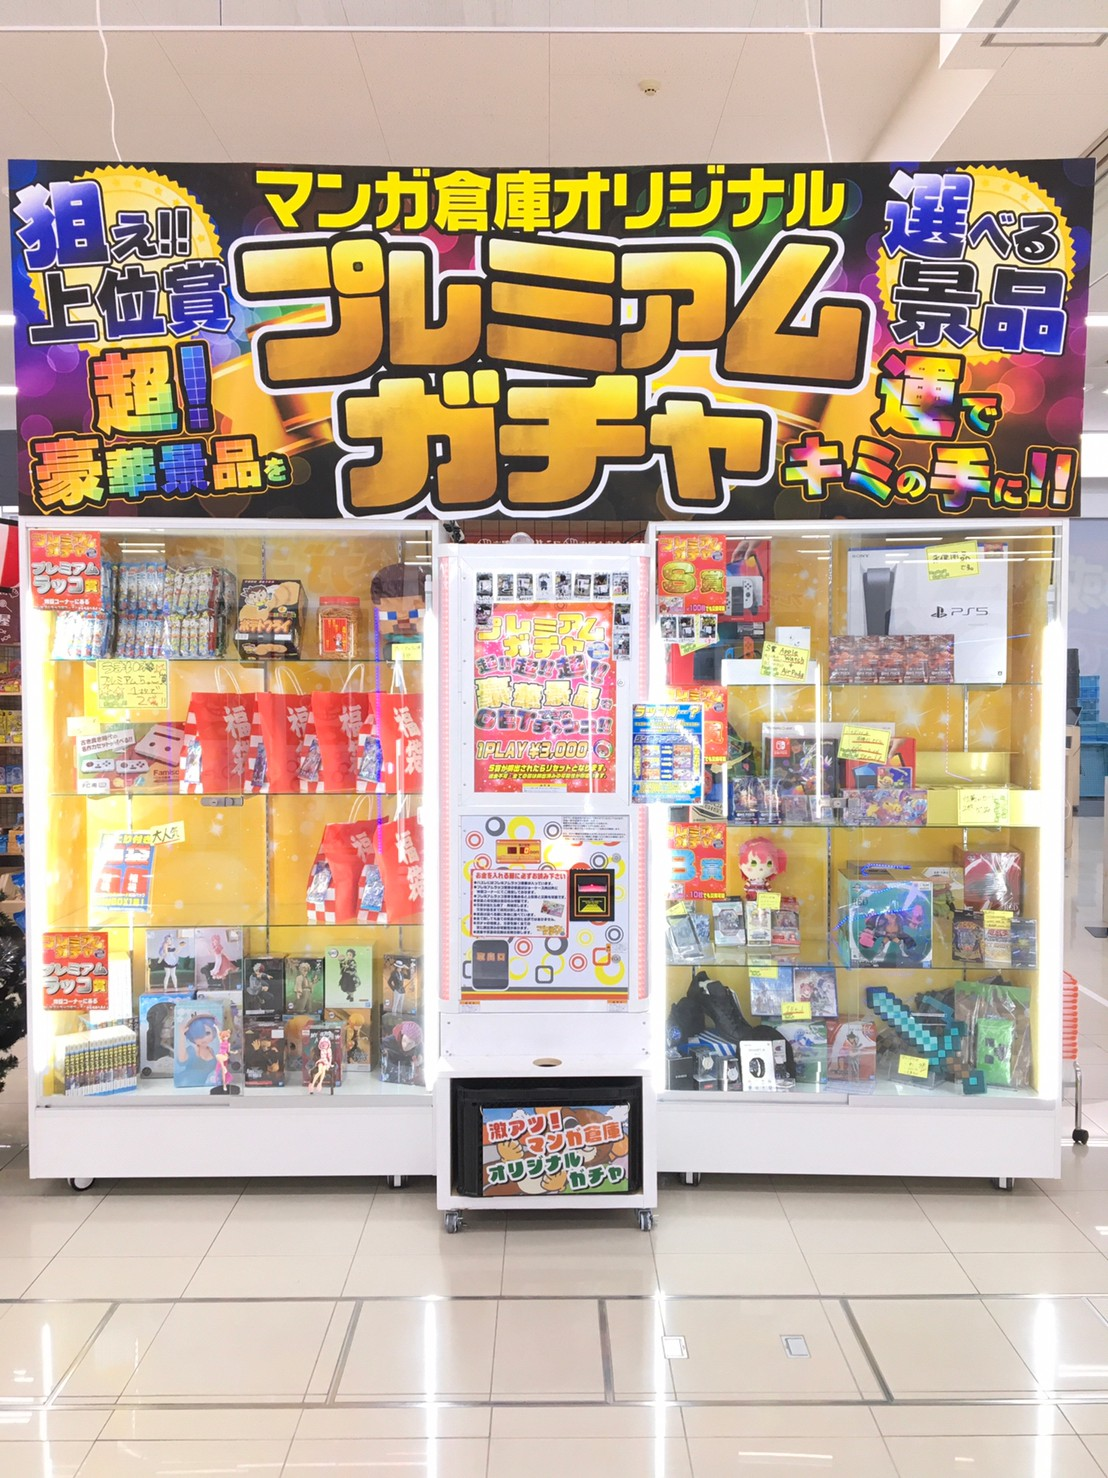 Premium gachapon with game consoles, video games, toys, and figures for prizes